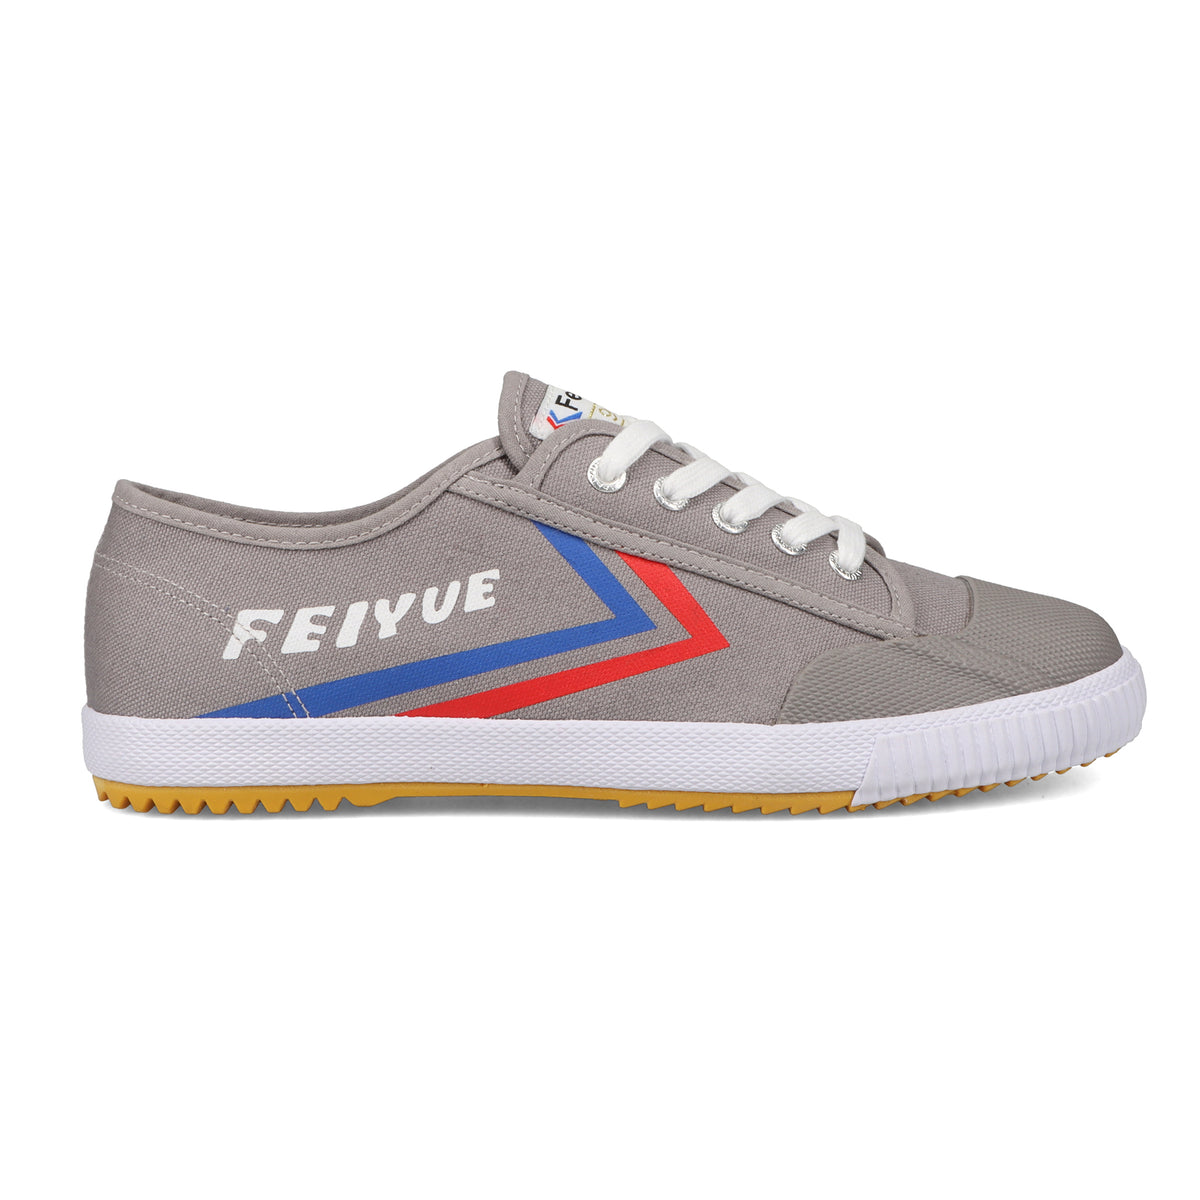 Feiyue Canvas 1920 Martial Arts Shoe White & Red Rubber Sole Size 10 W  Women's